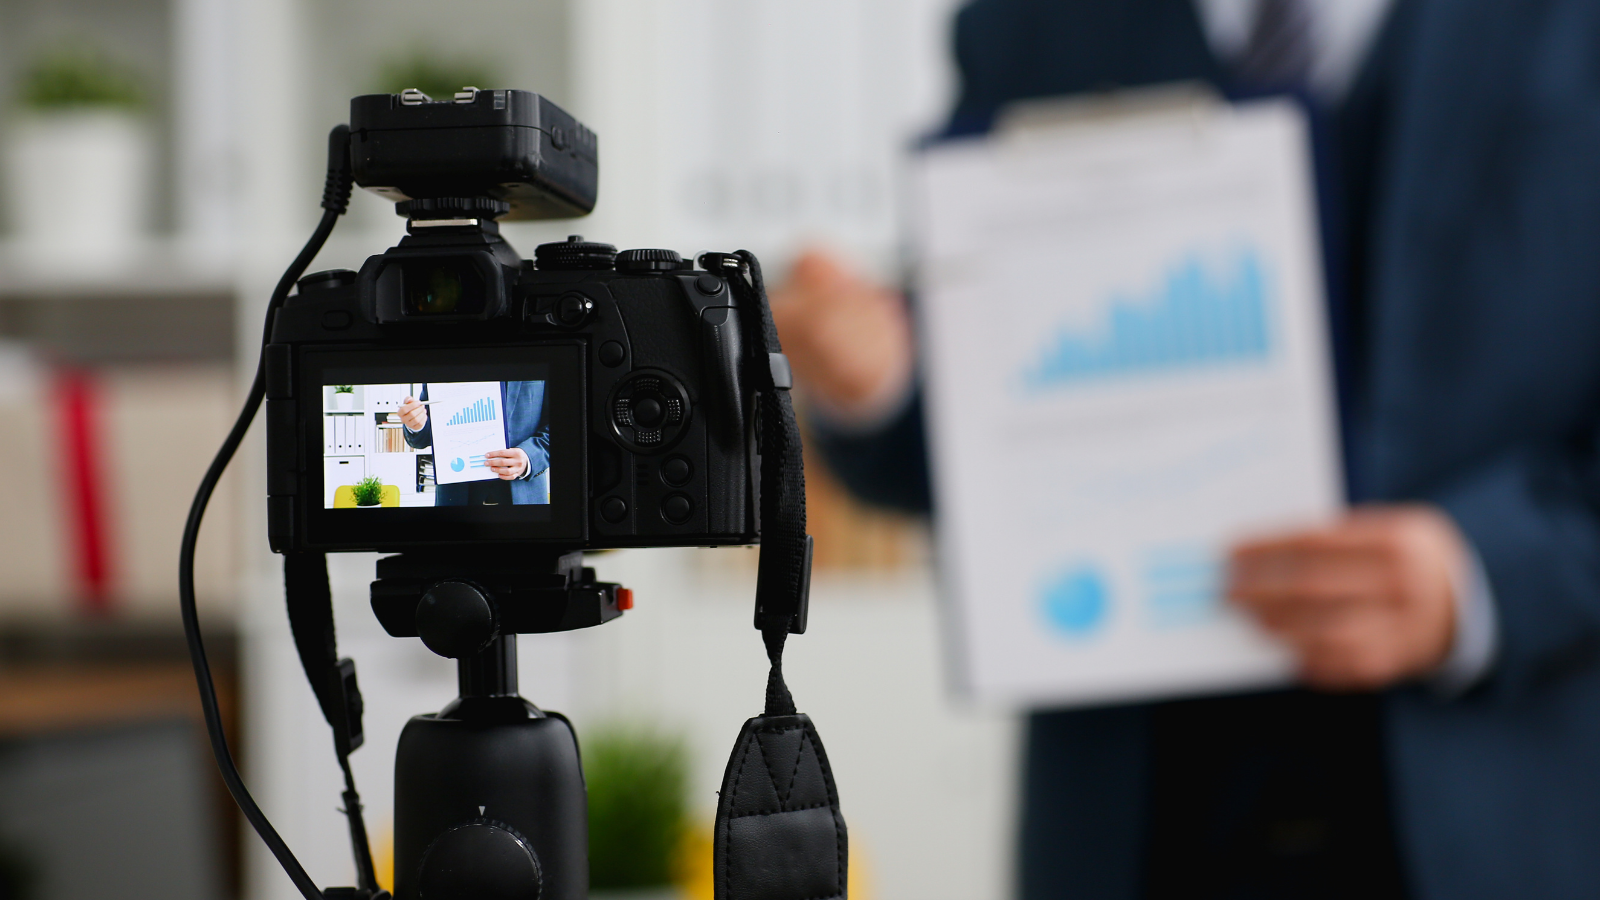 5 Reasons to Use Video Over Content in the Sales Process